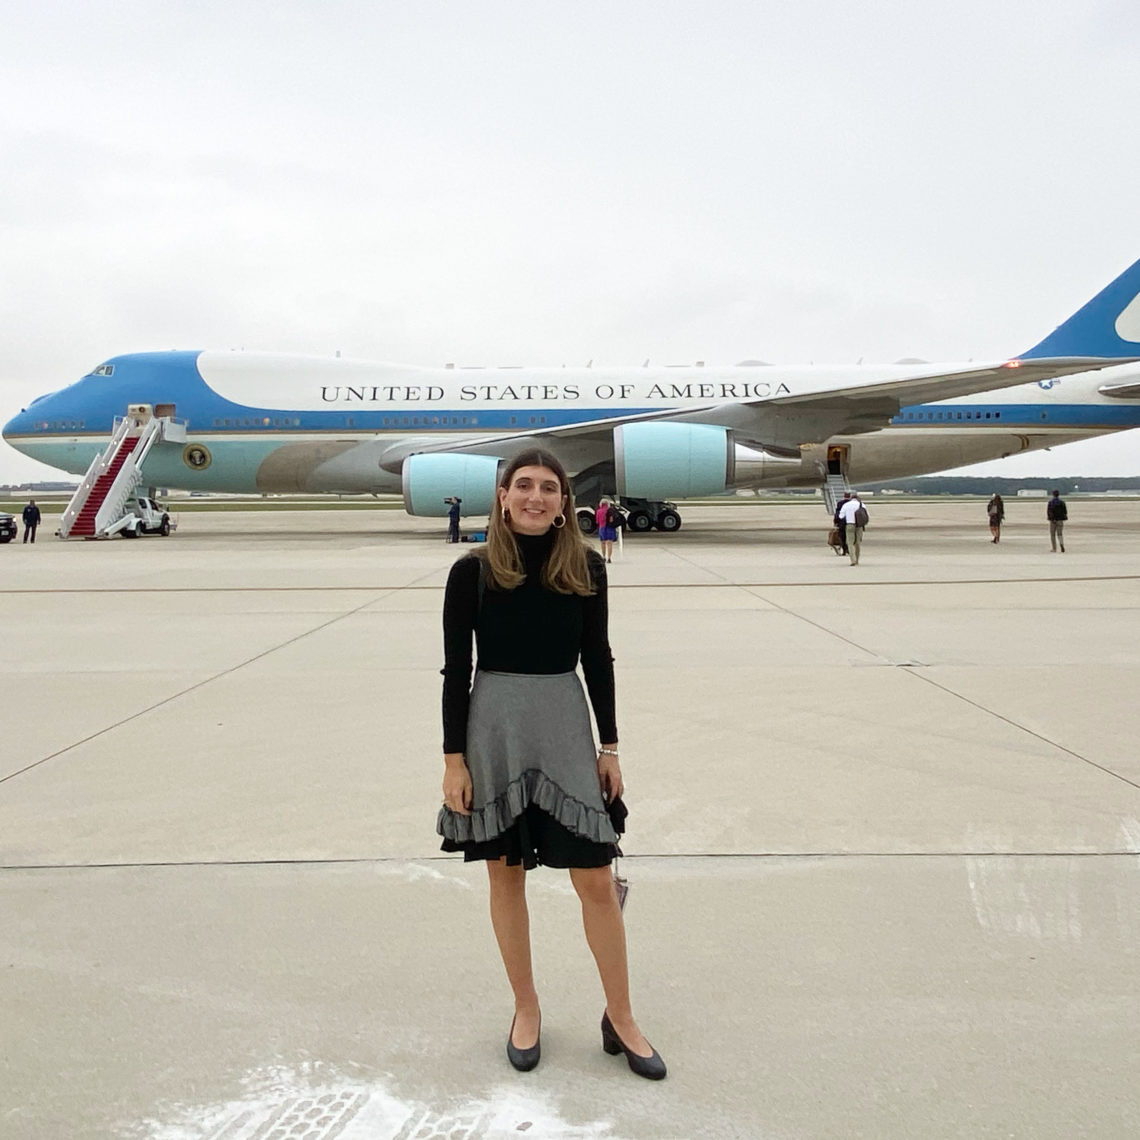 A person stands smiling on a tarmac in front of a large aircraft with 